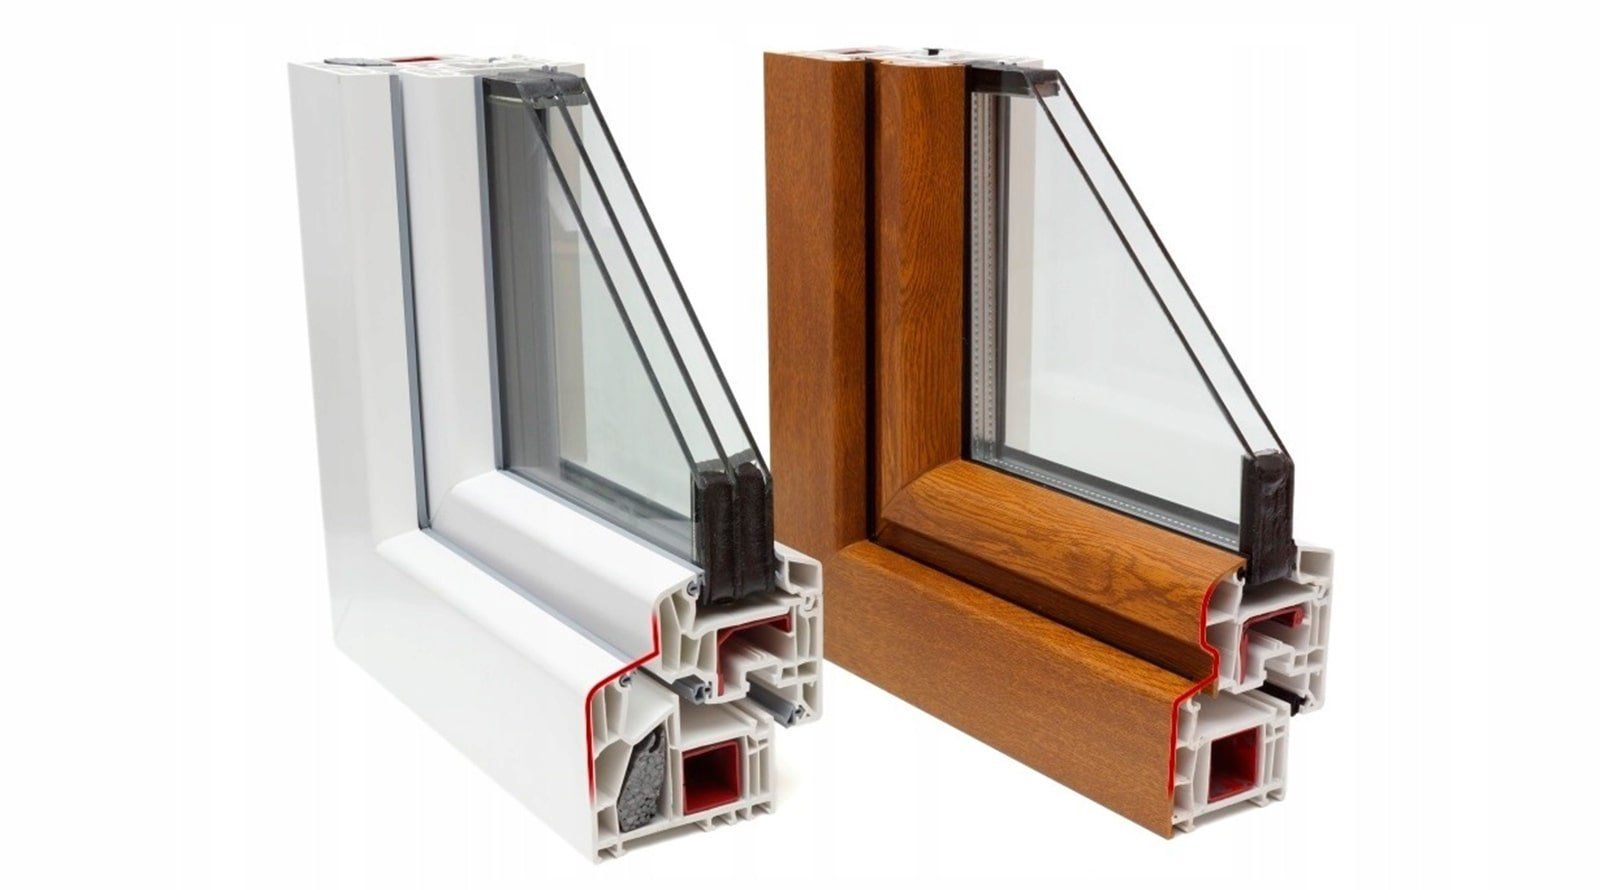 Energy conserving window material